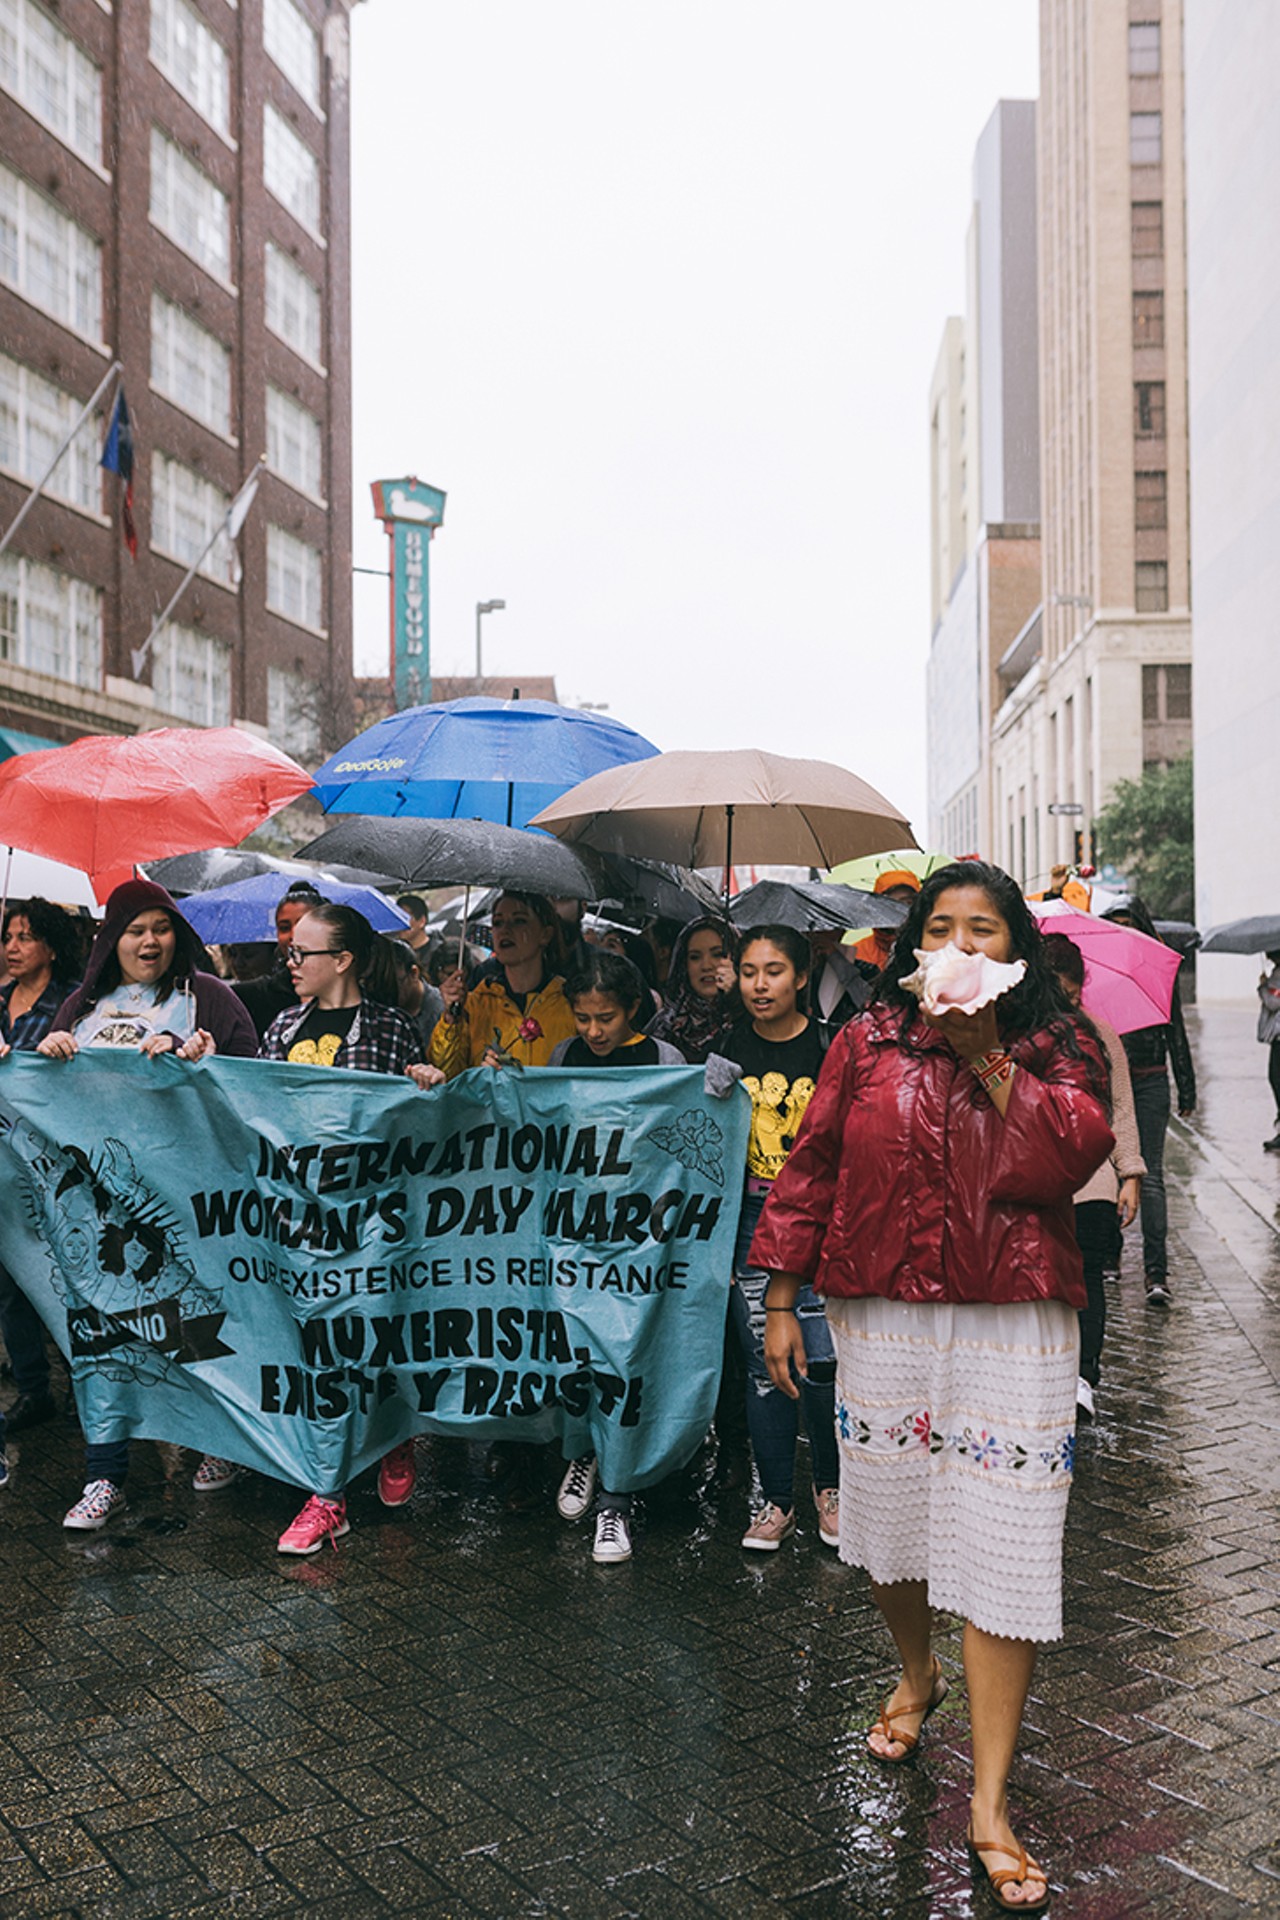 Hundreds Gather Downtown for the 27th International Woman's Day March